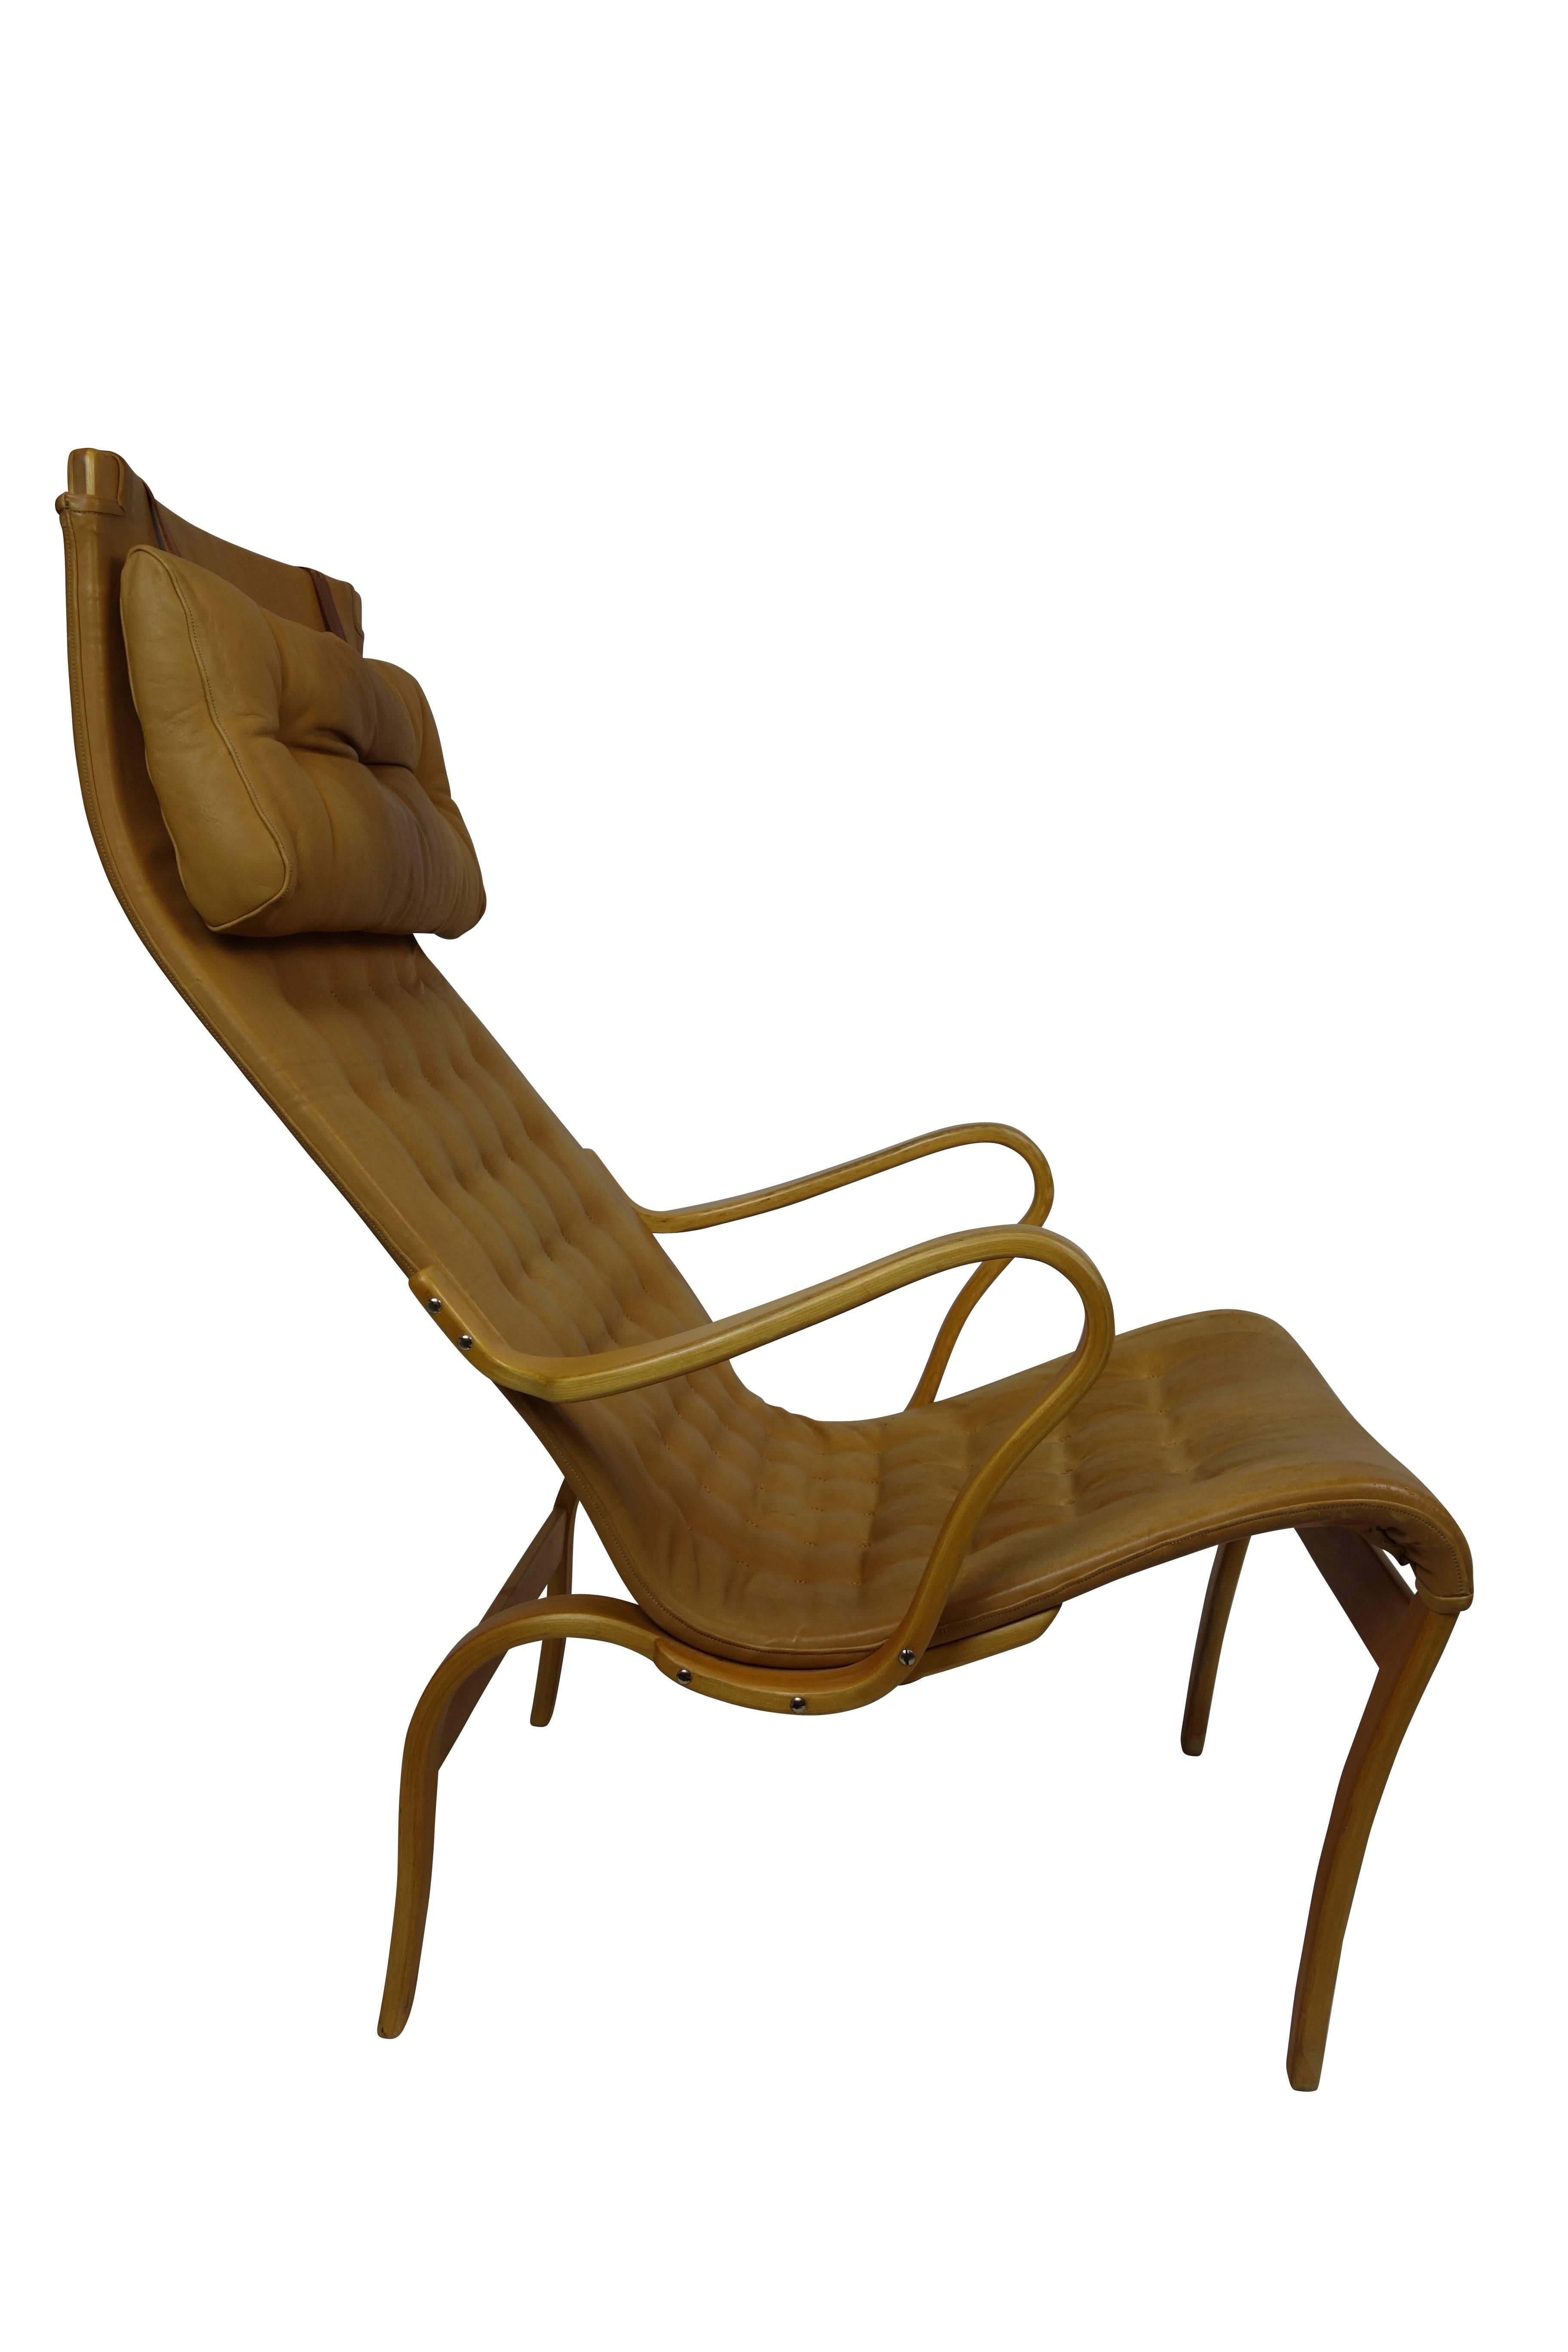 This is a sleek midcentury Miranda lounge chair by Bruno Mathsson in lamented bent birchwood in its original tan leather upholstery circa 1960.  